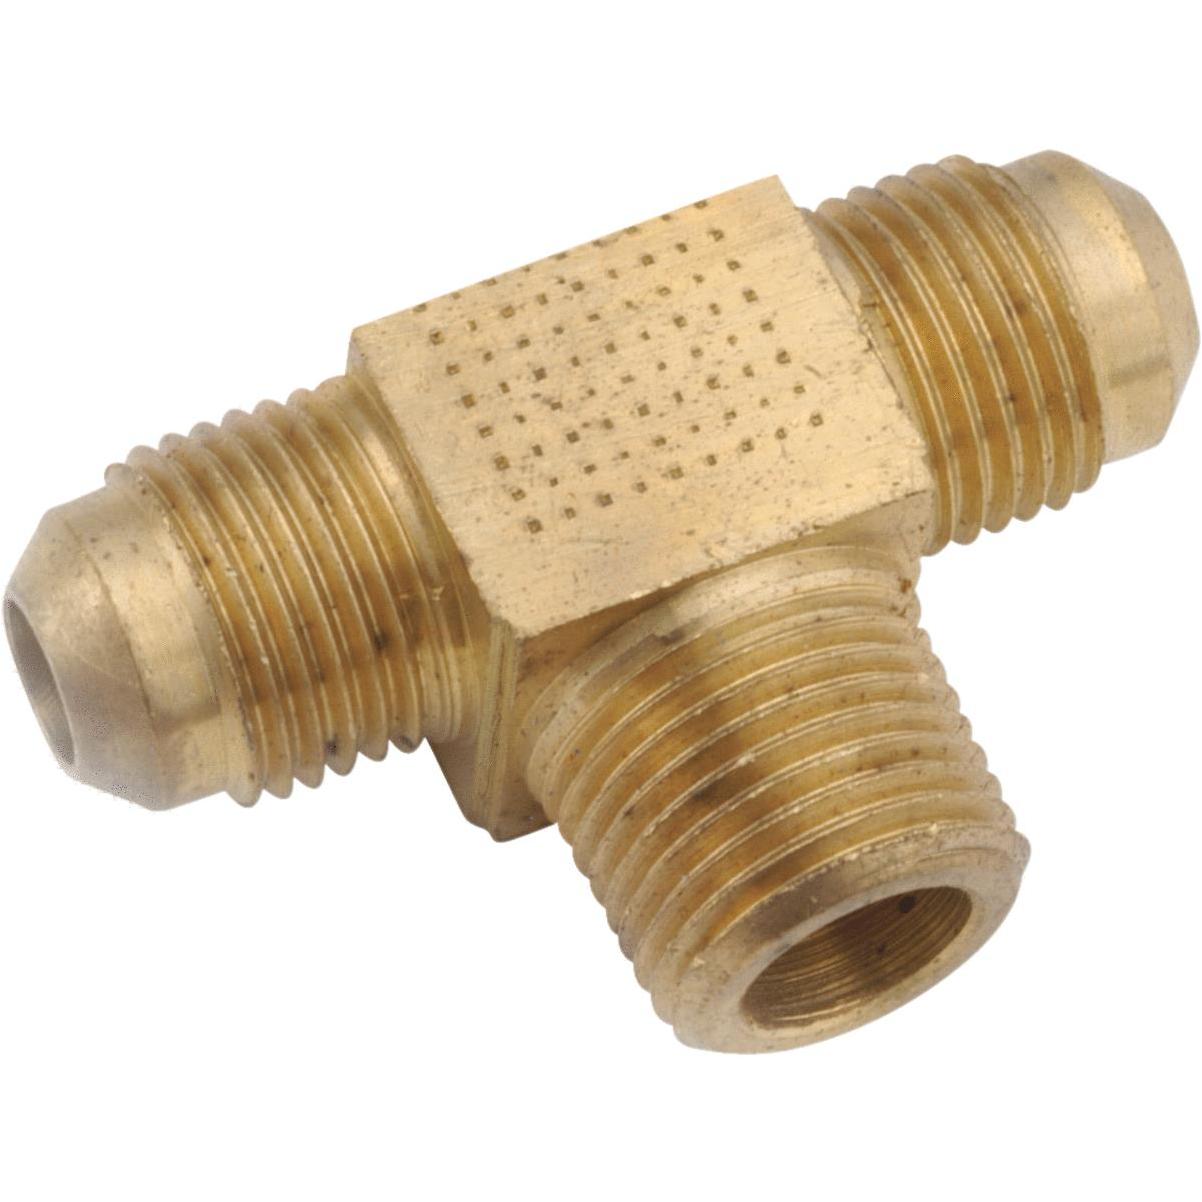 Anderson Metals Brass Connector, 3/8 In. Compression x 1/4 In. MPT